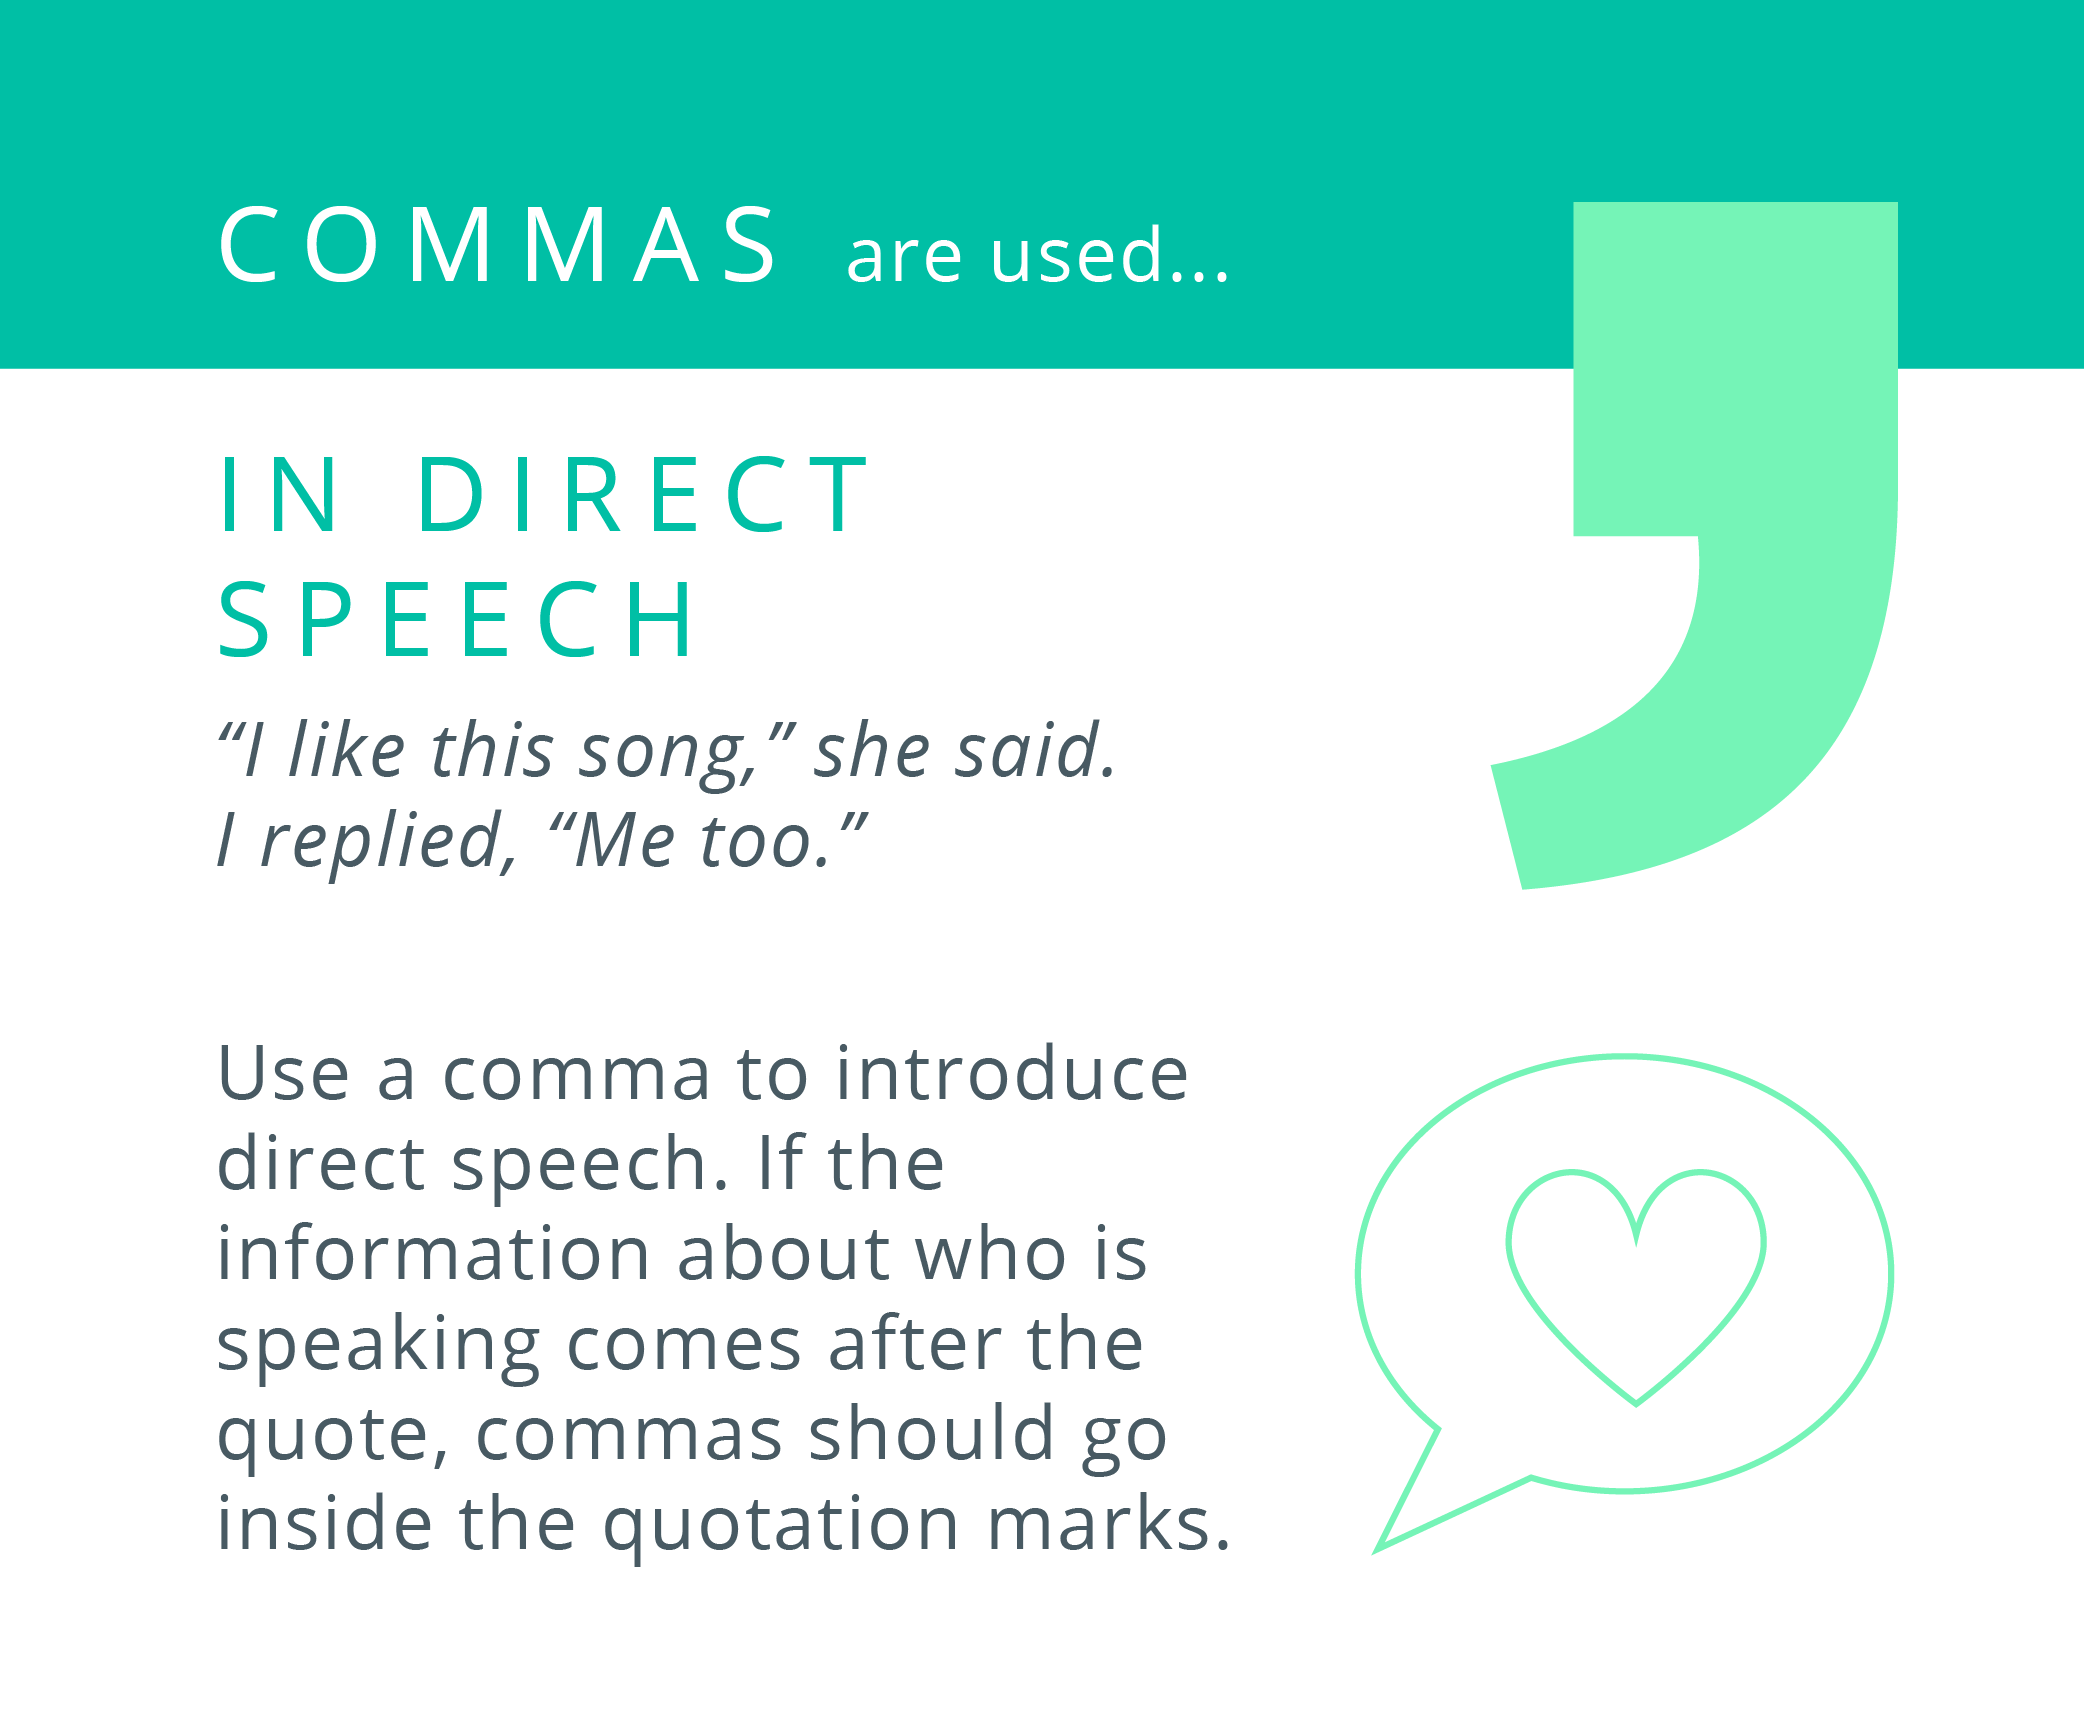 Commas are used in direct speech.